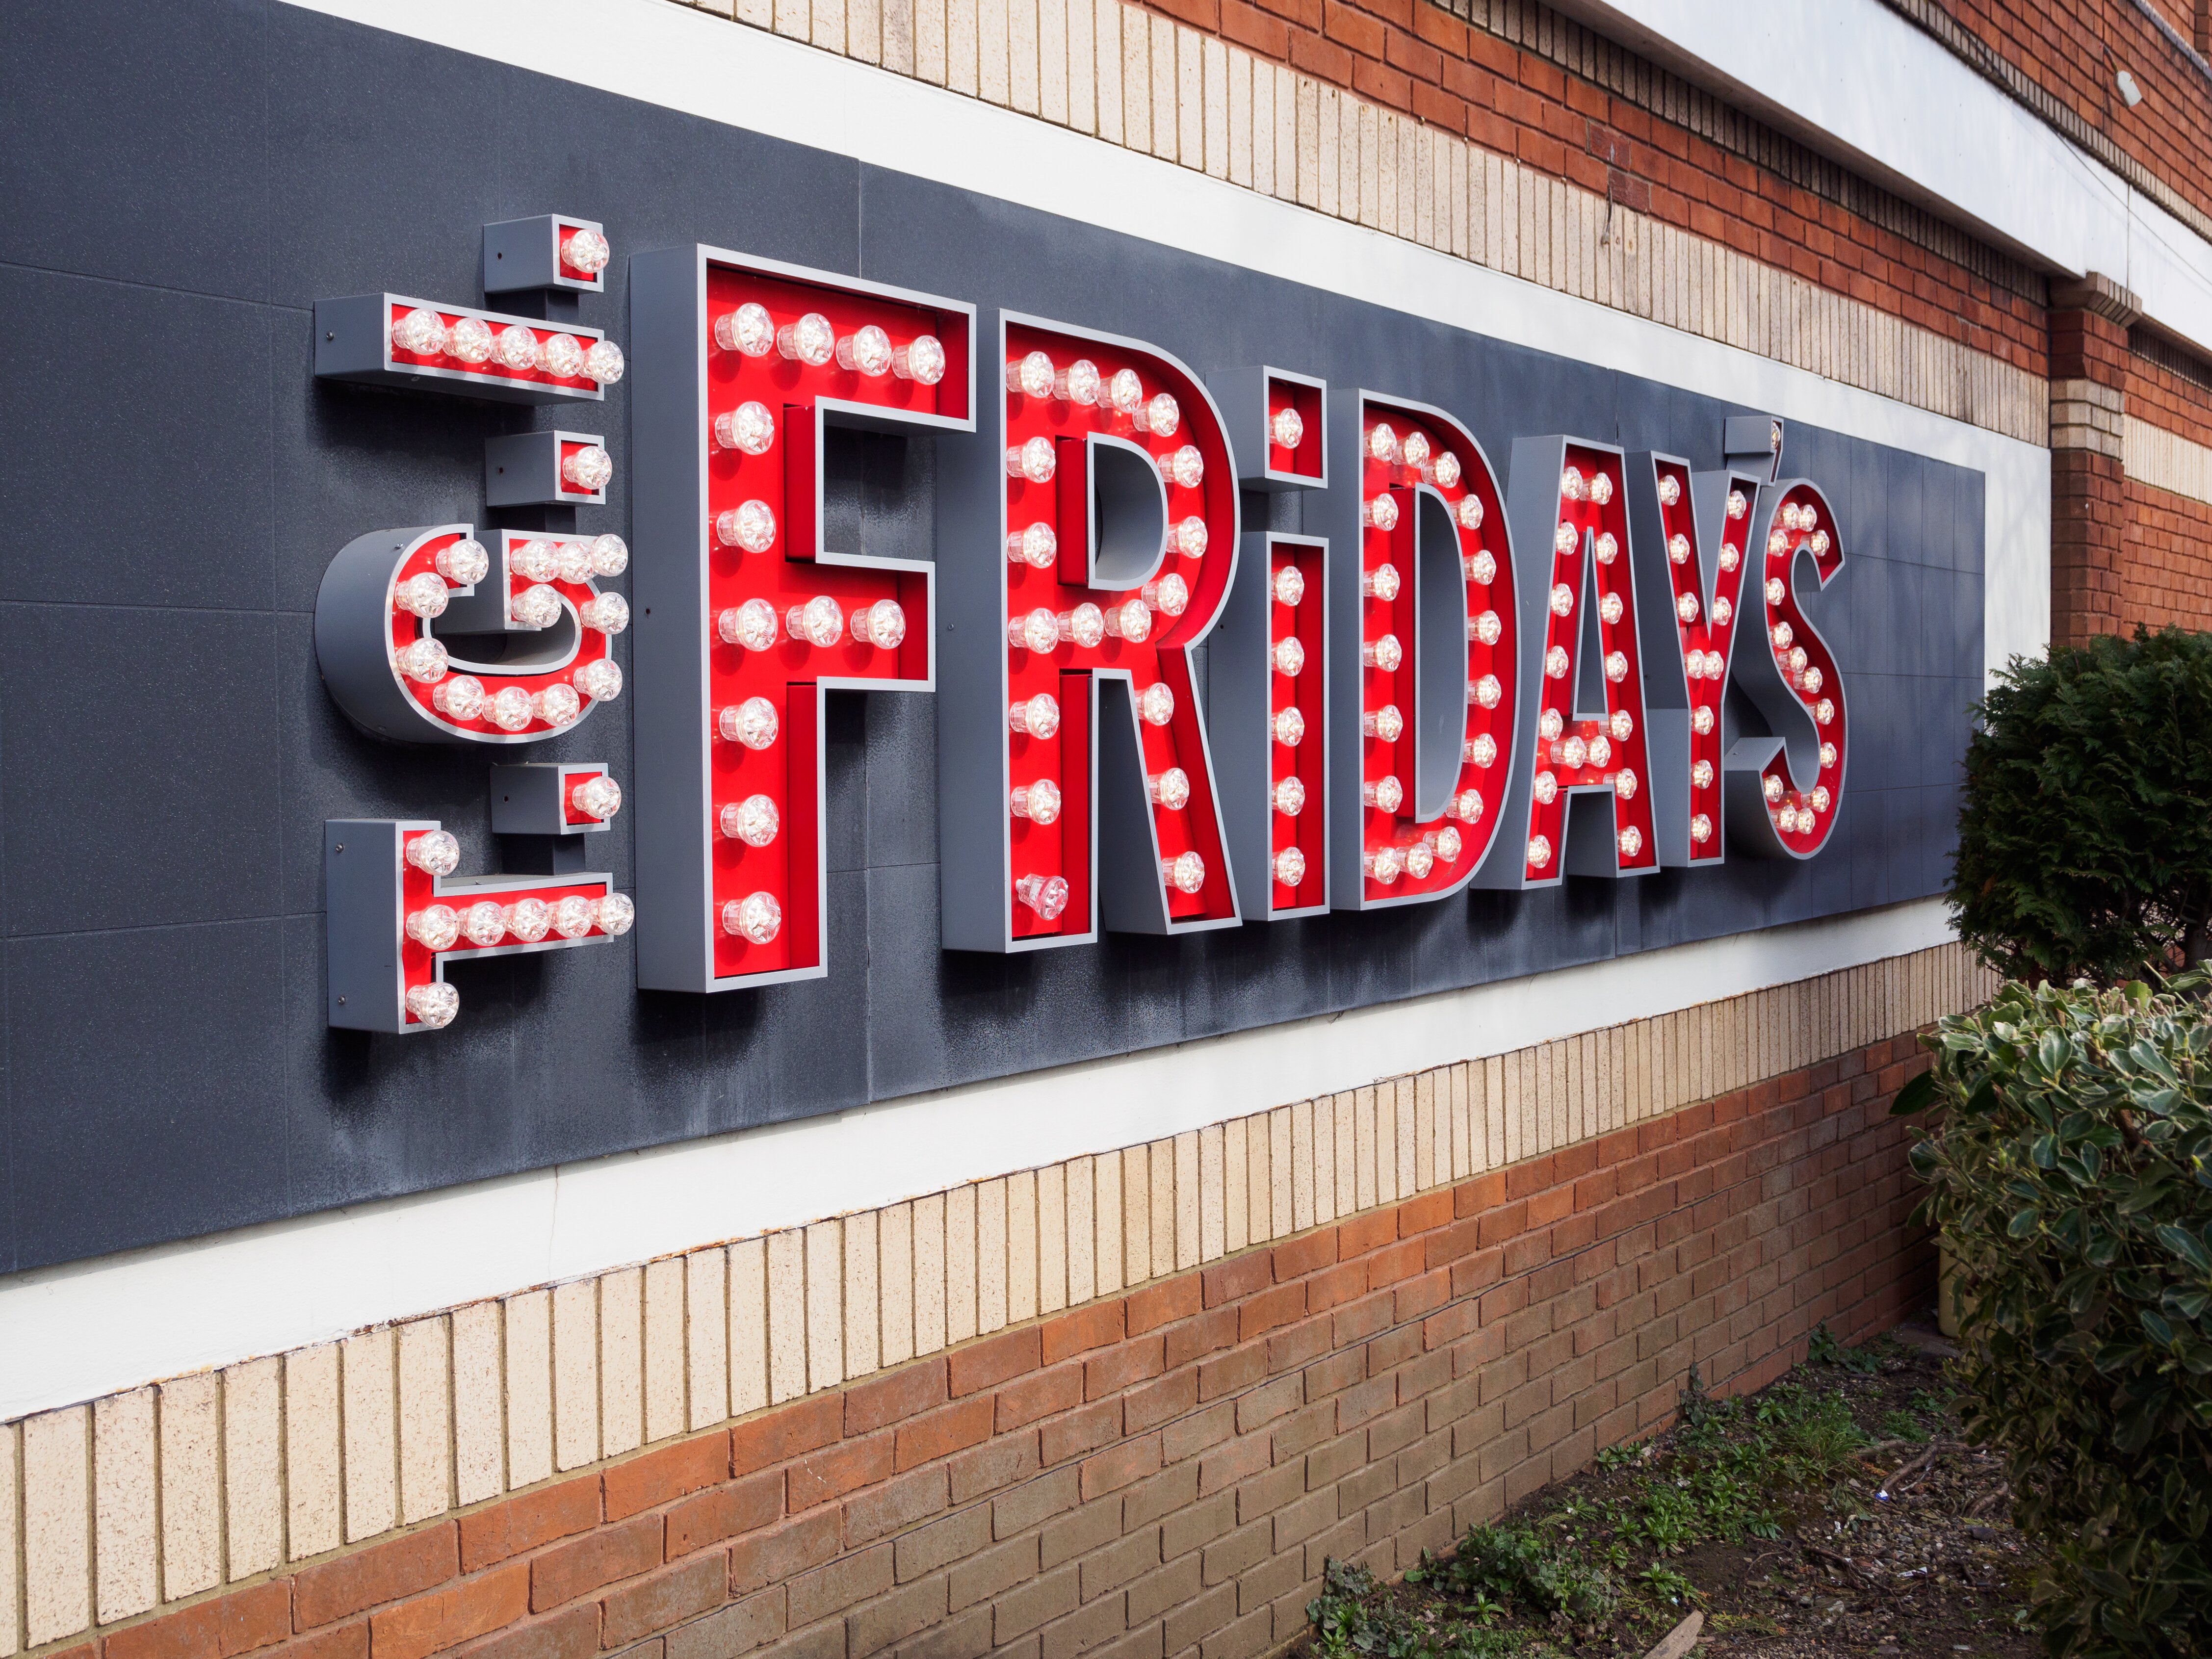 Hostmore in talks to acquire TGI Fridays for £177m